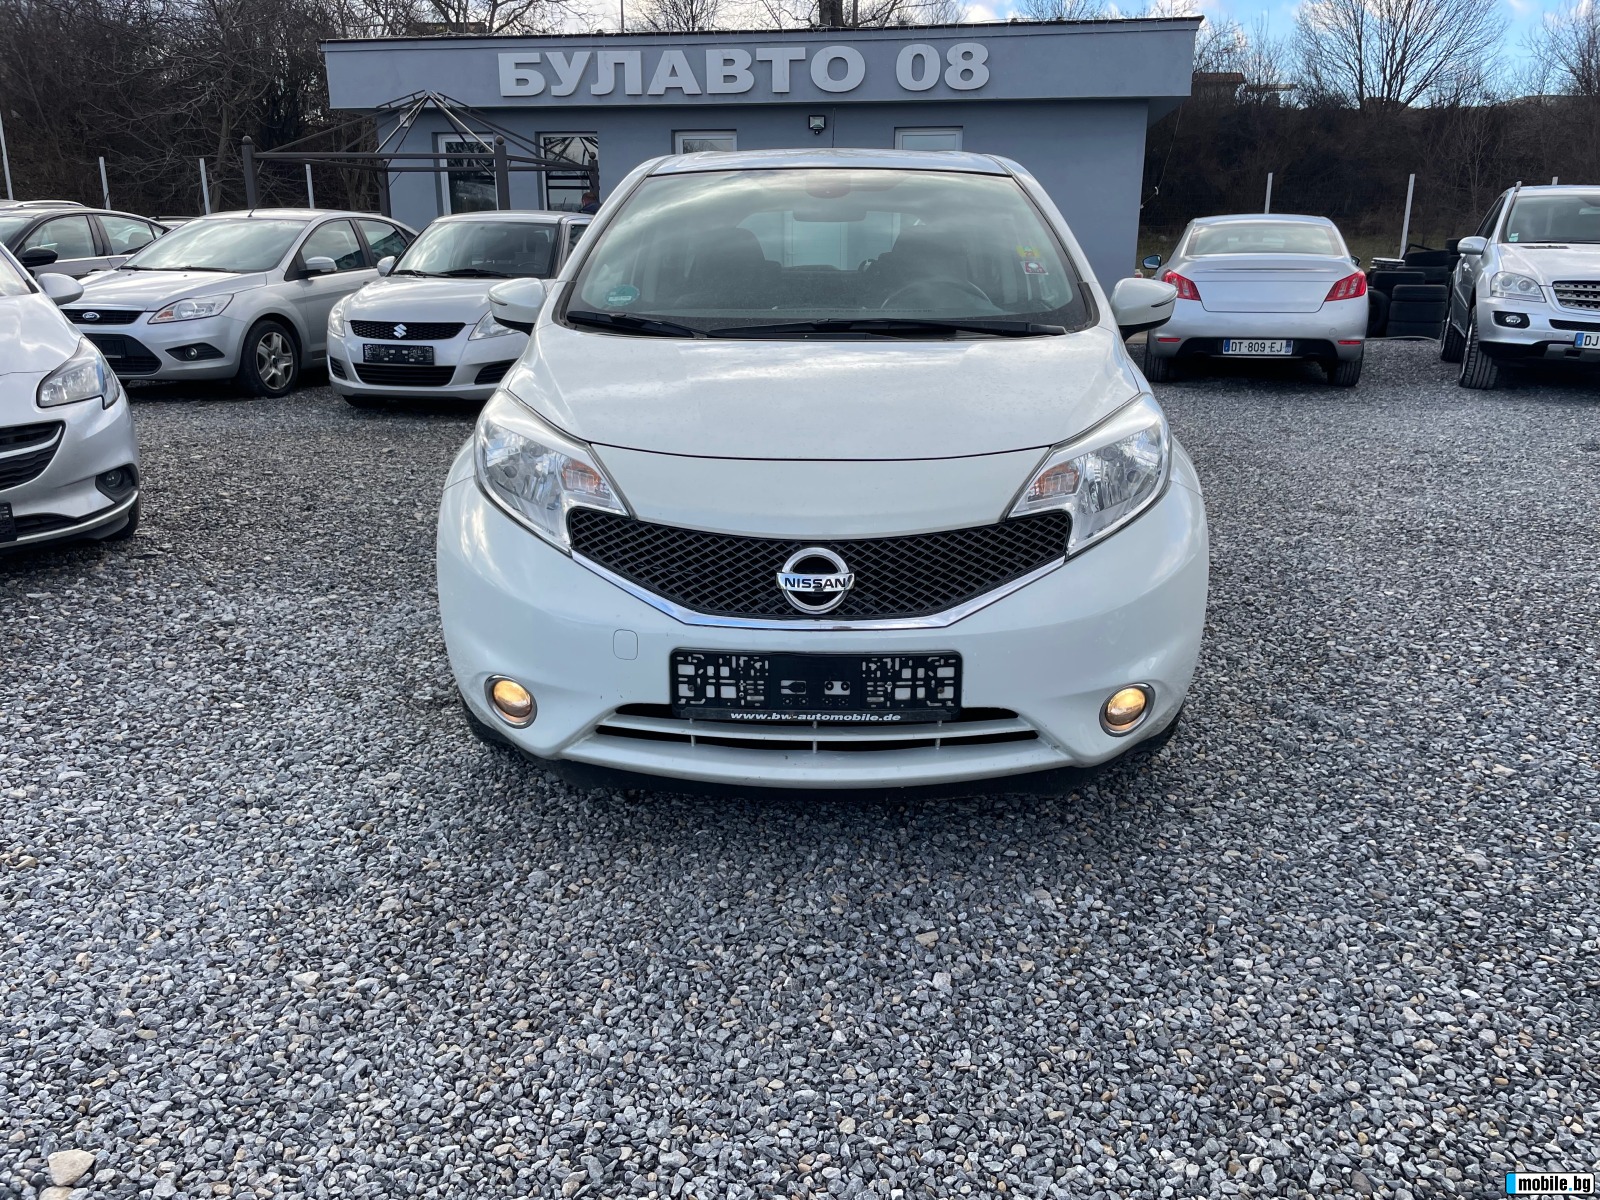 Nissan Note 1.5 DCI EVRO 5 | Mobile.bg   2